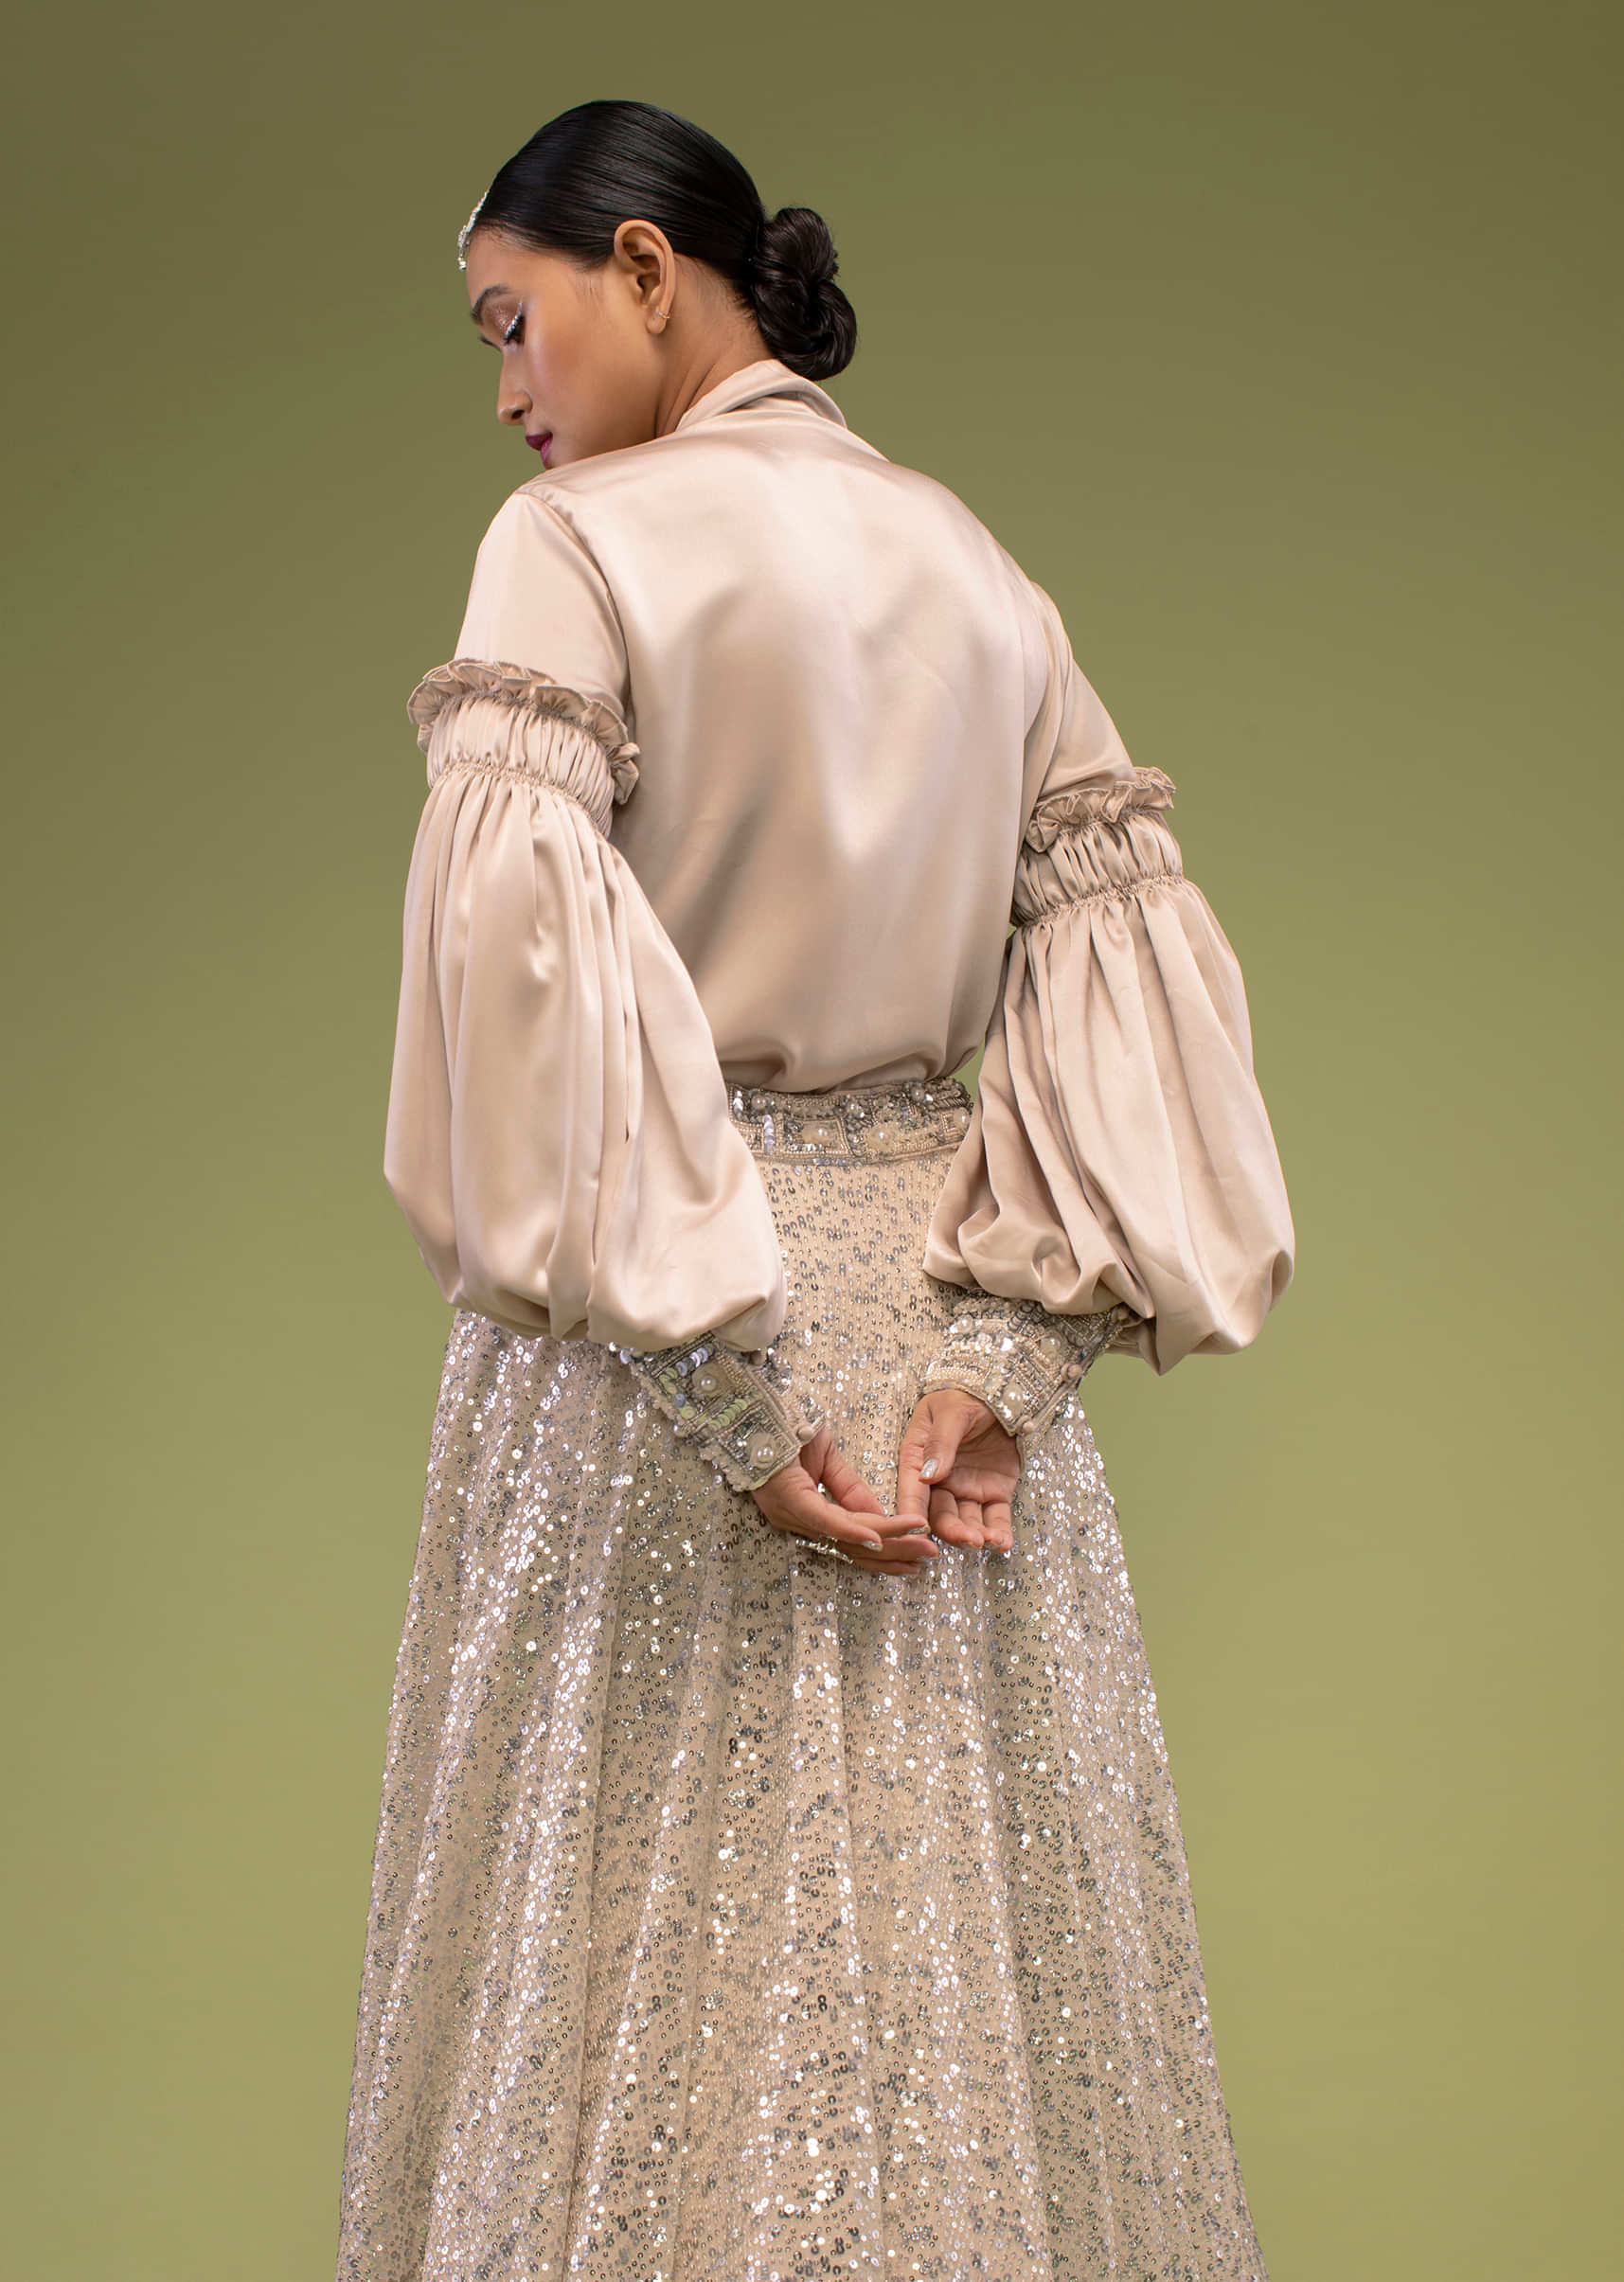 English Beige Shirt And Ivory Lehenga In Sequins Embroidery, Shirt Is Crafted In Satin With A Bow Tie-Up At The Front